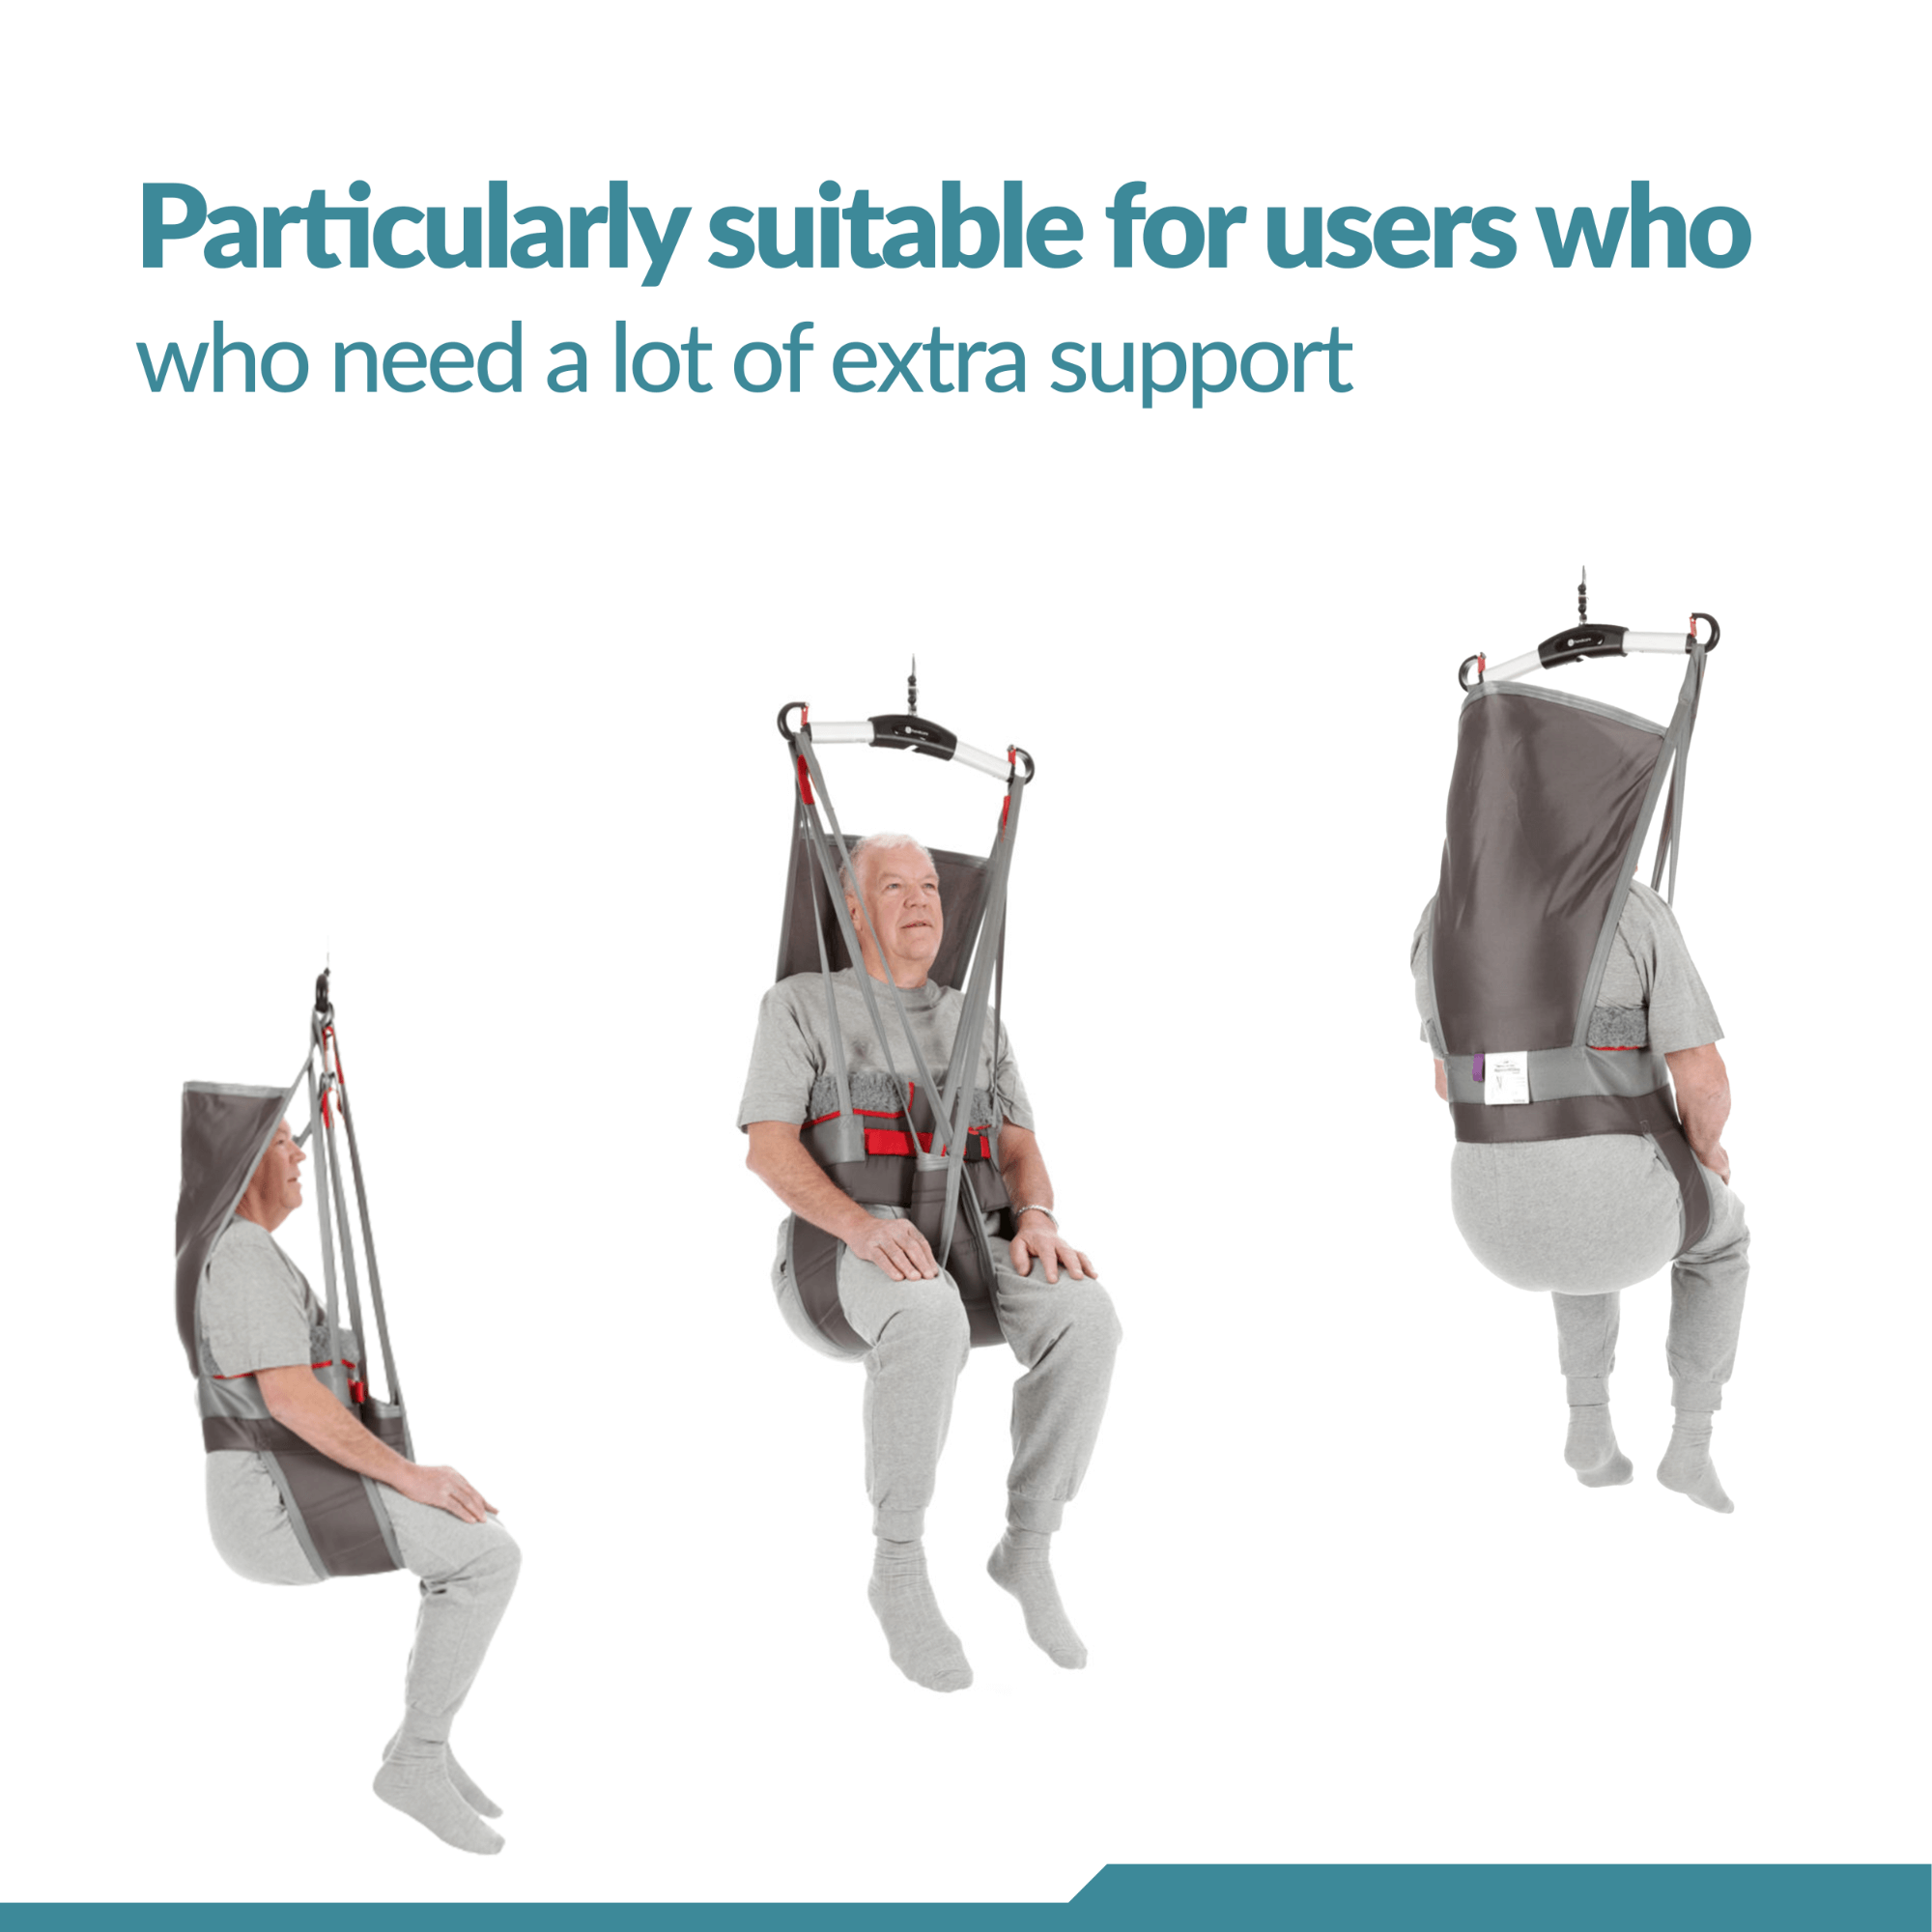 Toileting Sling - Hygiene Extra Head Support - Universal Patient Lift Sling for Lifts for Home Use - Transfer Safely with Patient Lifter - Compatible with Hoyer Lift - Easy-to-Use